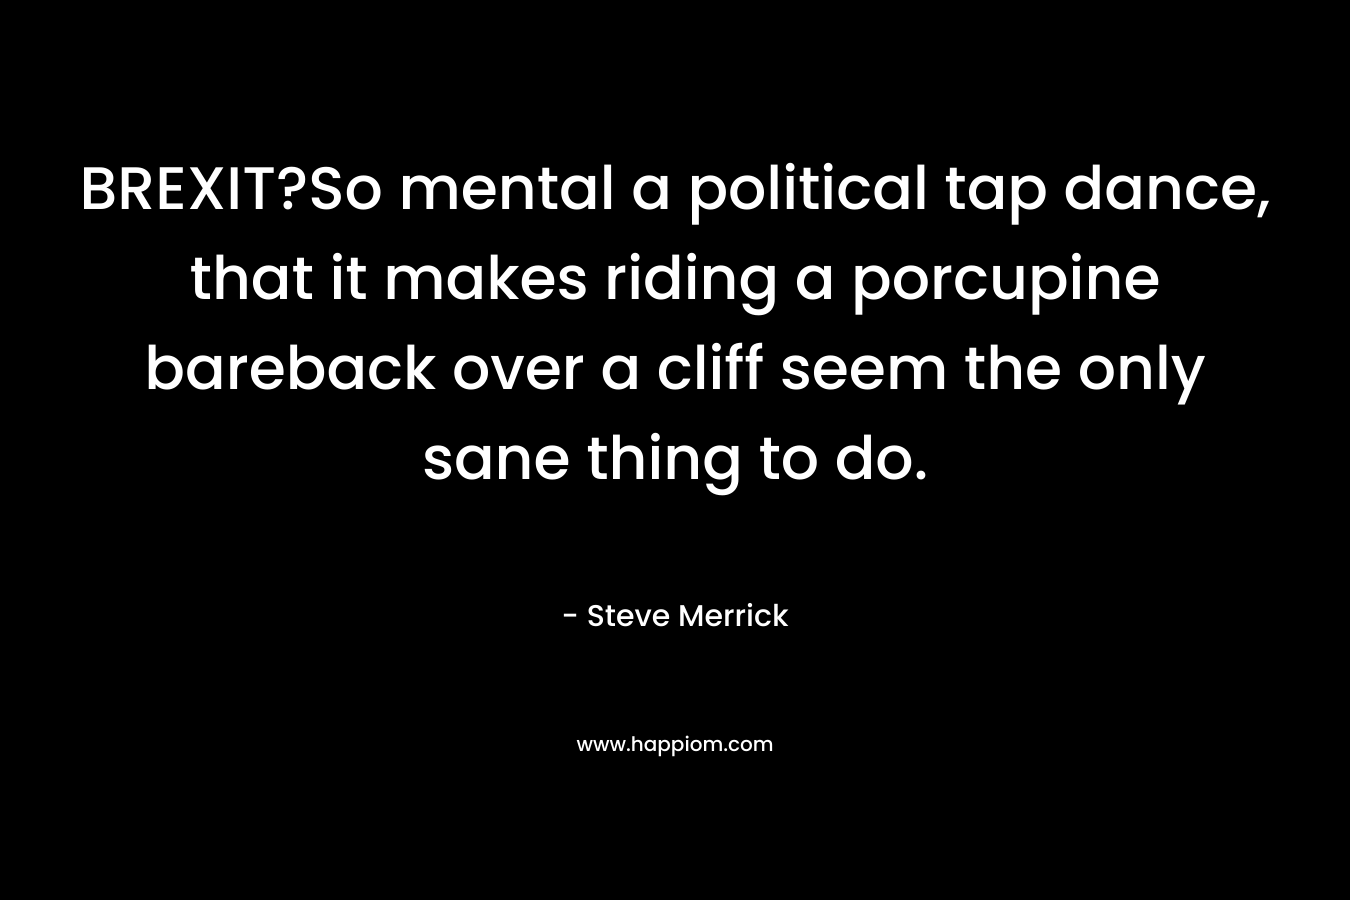 BREXIT?So mental a political tap dance, that it makes riding a porcupine bareback over a cliff seem the only sane thing to do. – Steve Merrick